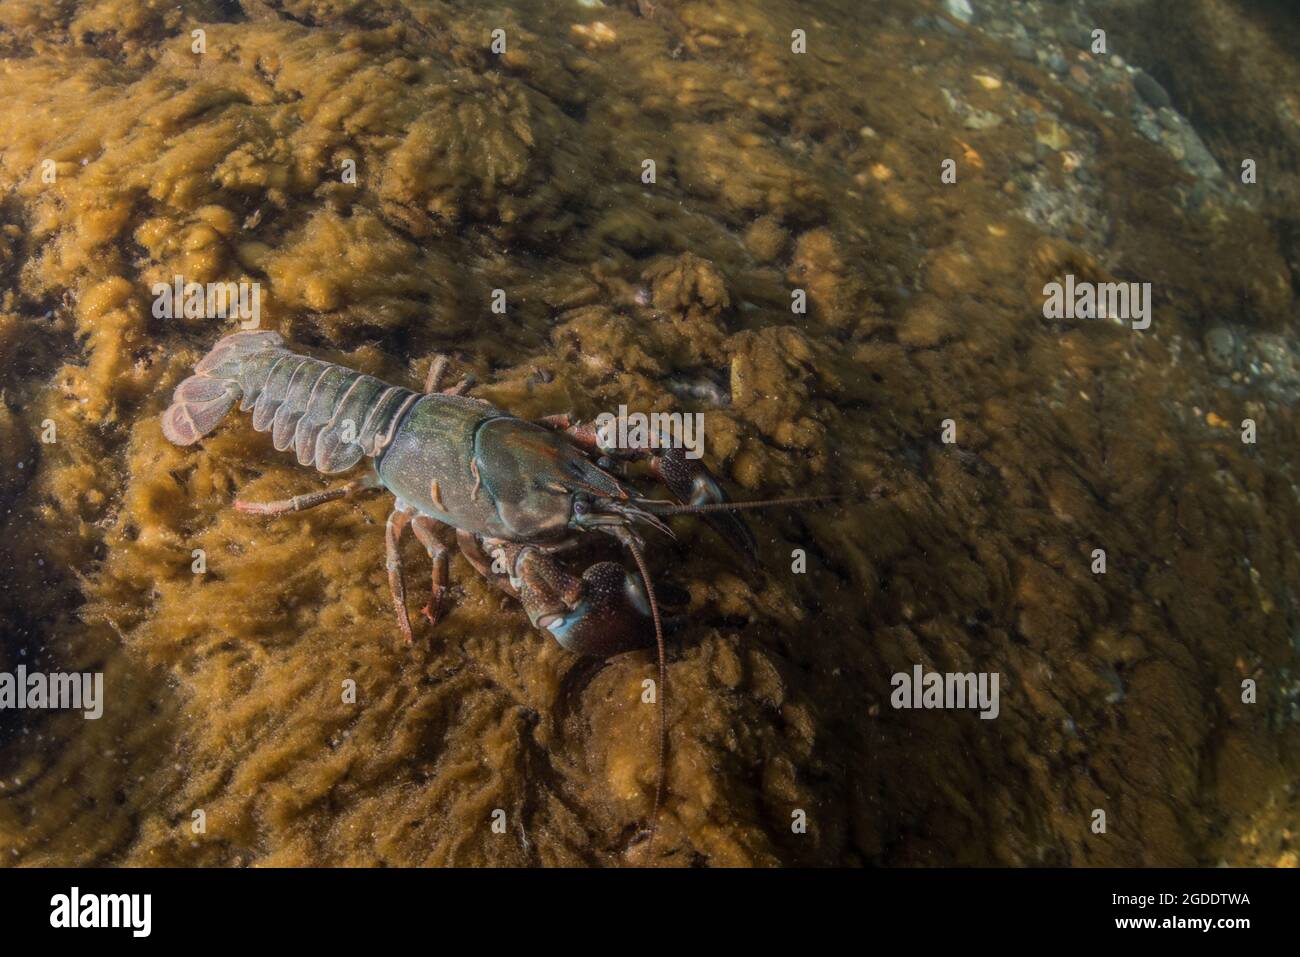 Signal crayfish (Pacifastacus leniusculus) underwater in a river, a hamrful invasive species in California and much of Europe. Stock Photo